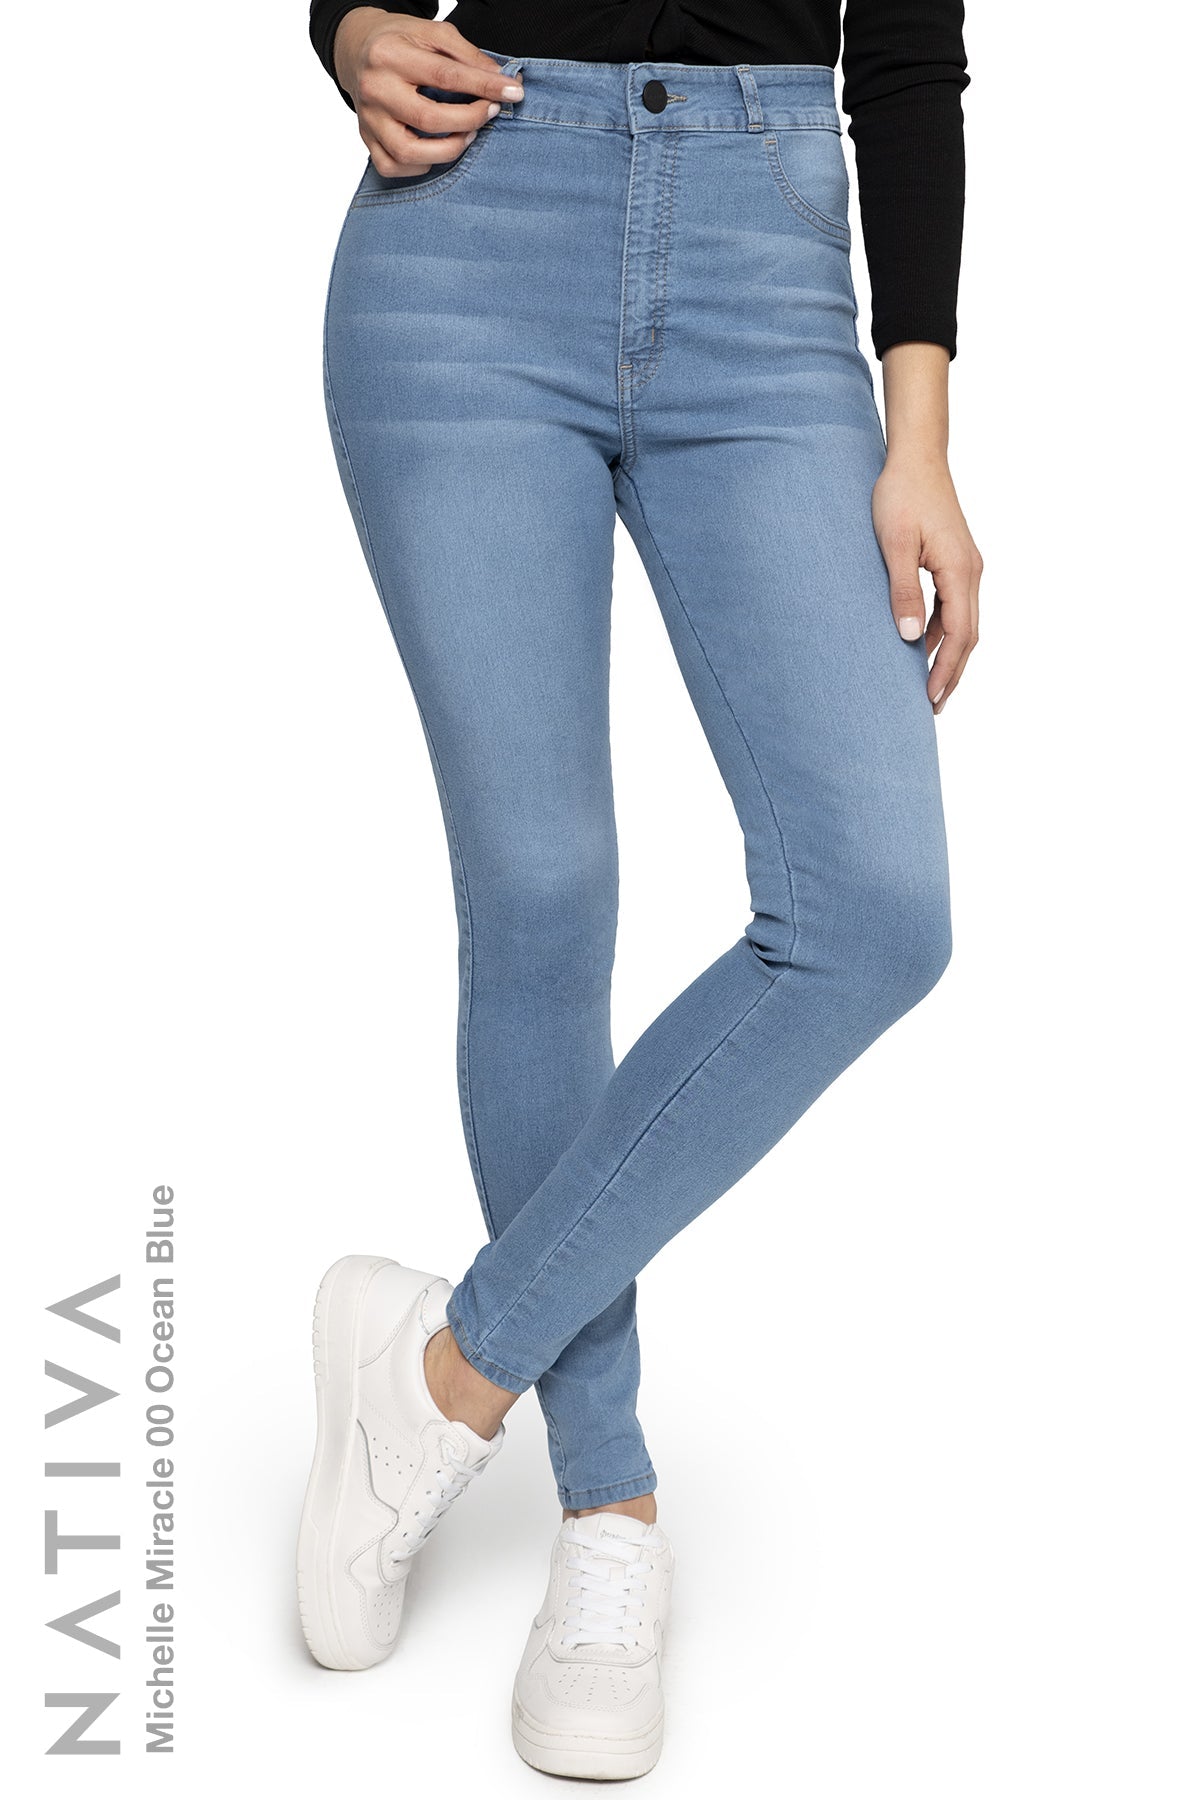 MIRACLE NATIVA, High MICHELLE OCEAN Ca Shaping STRETCH JEANS. 00 BLUE,